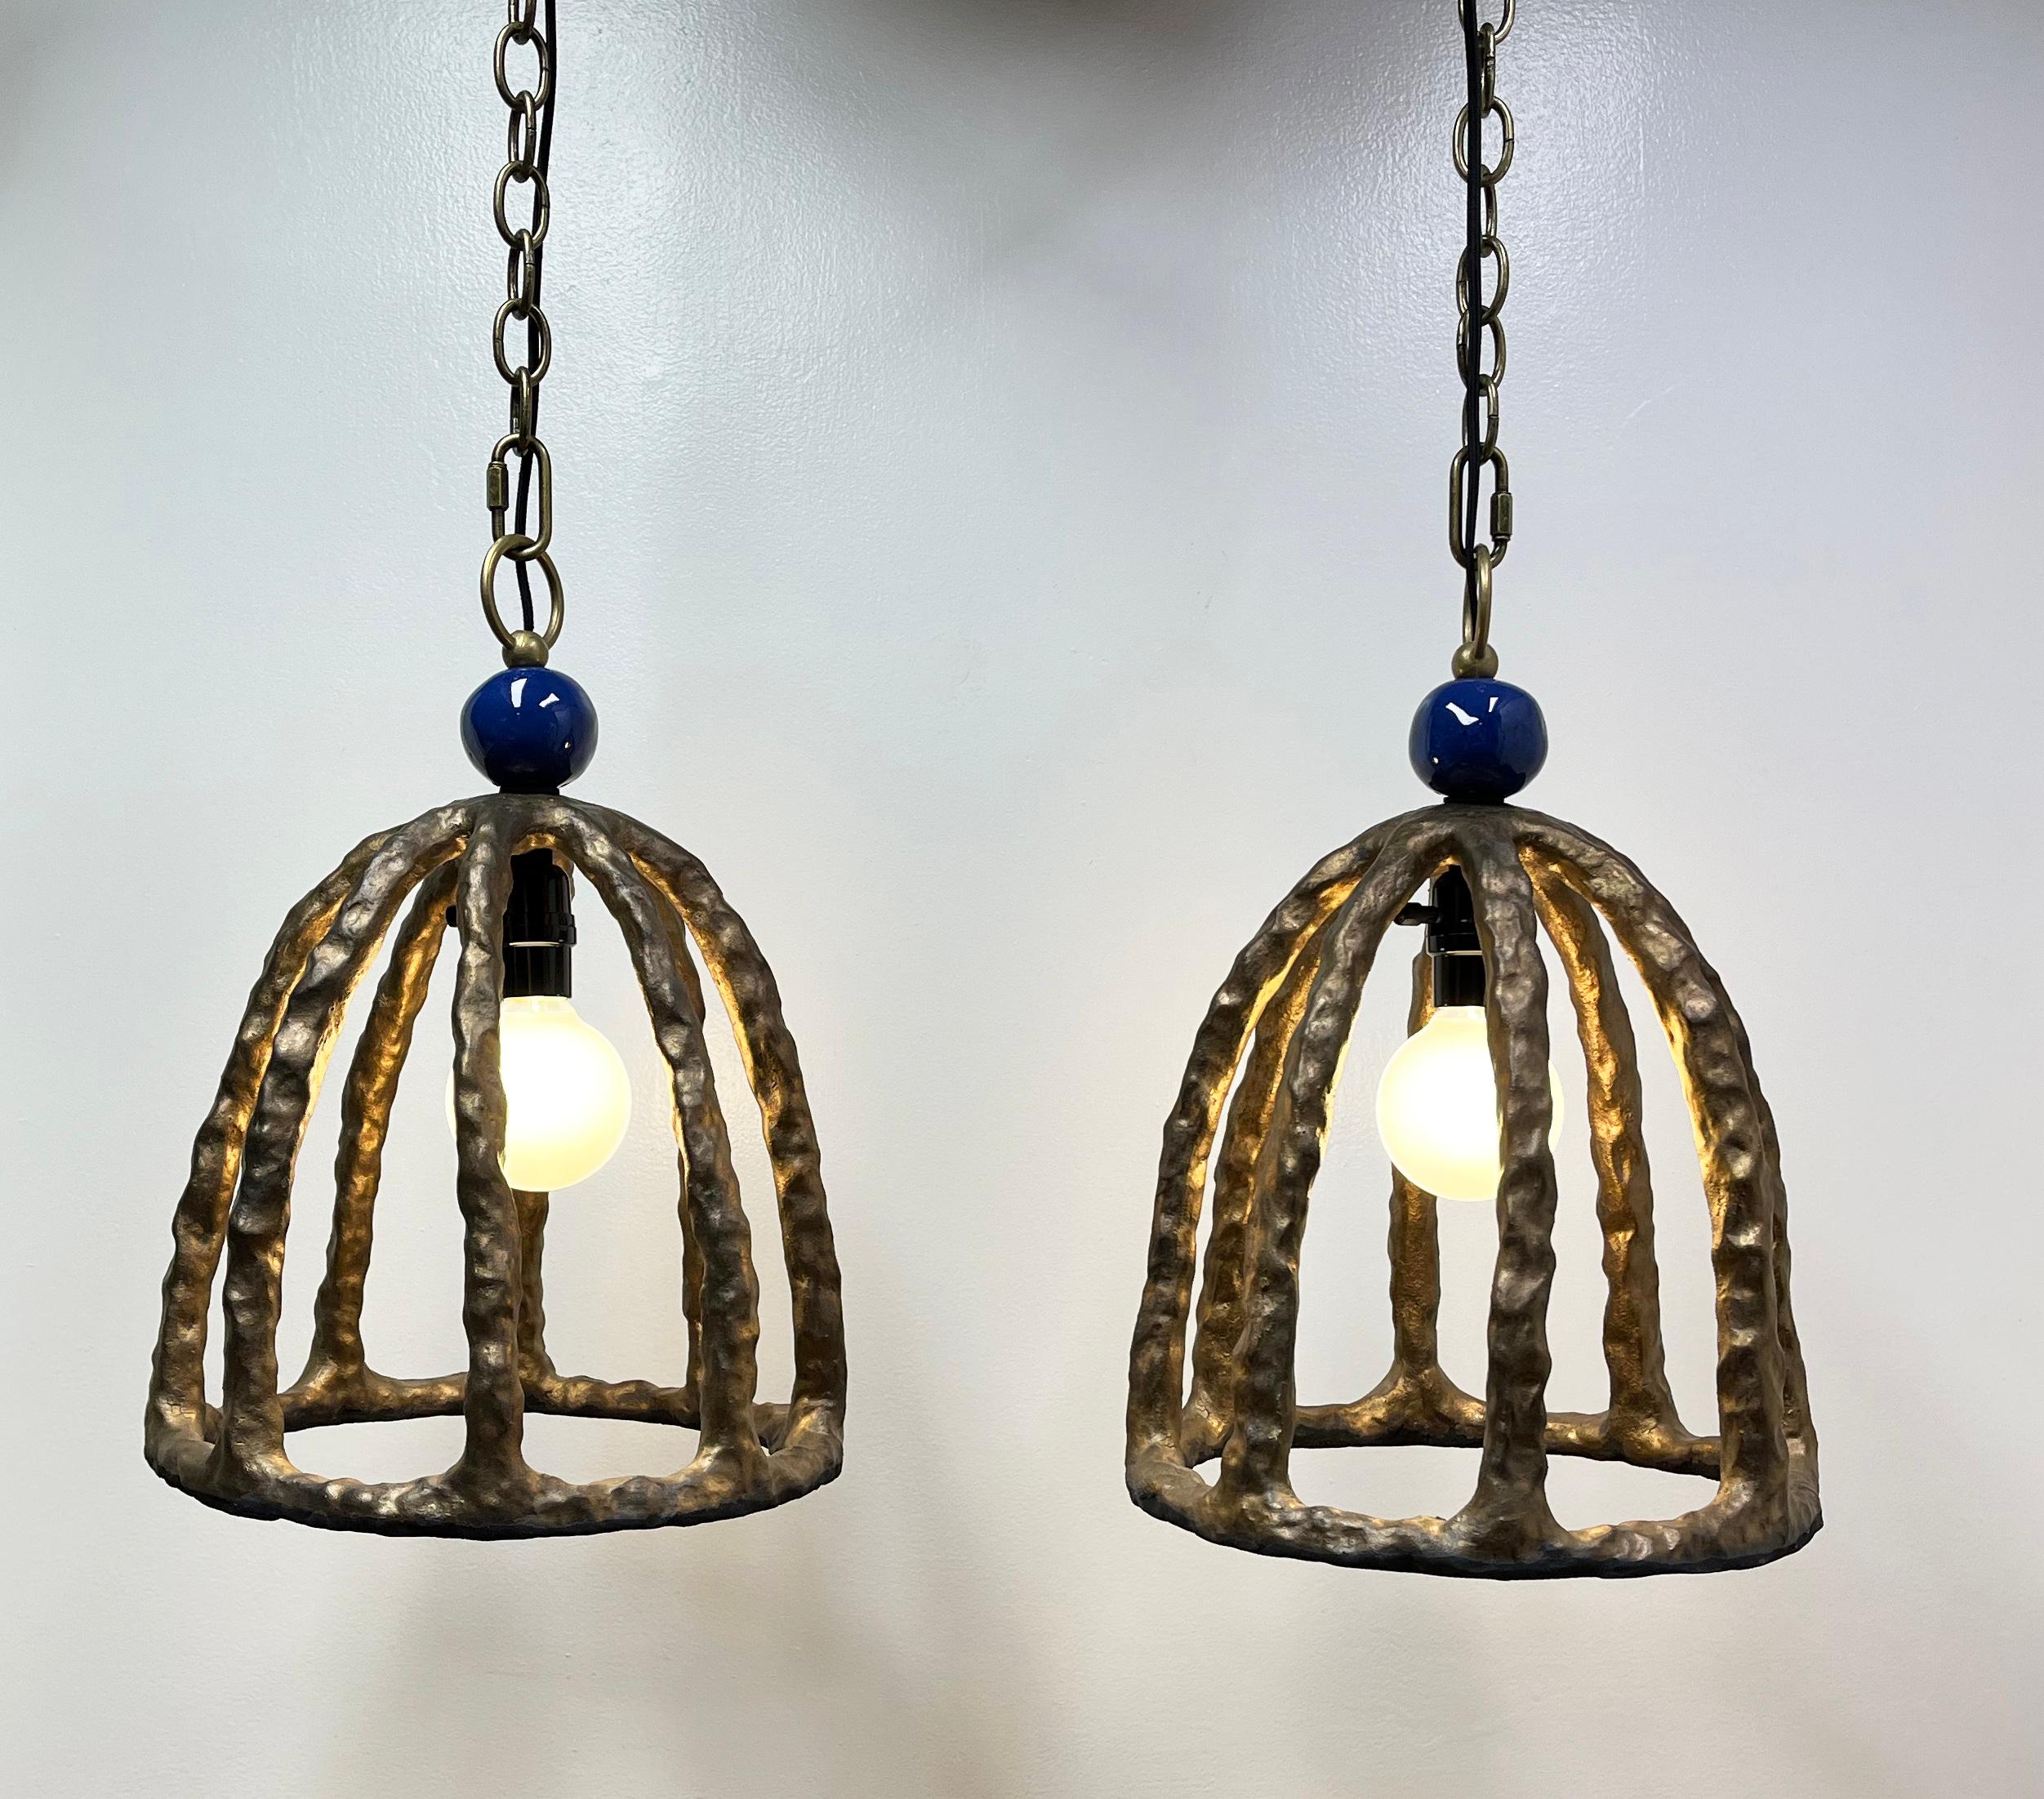 Birdcage Stoneware Pendant Lamp Pair by Olivia Barry / By Hand Eclectic Mix For Sale